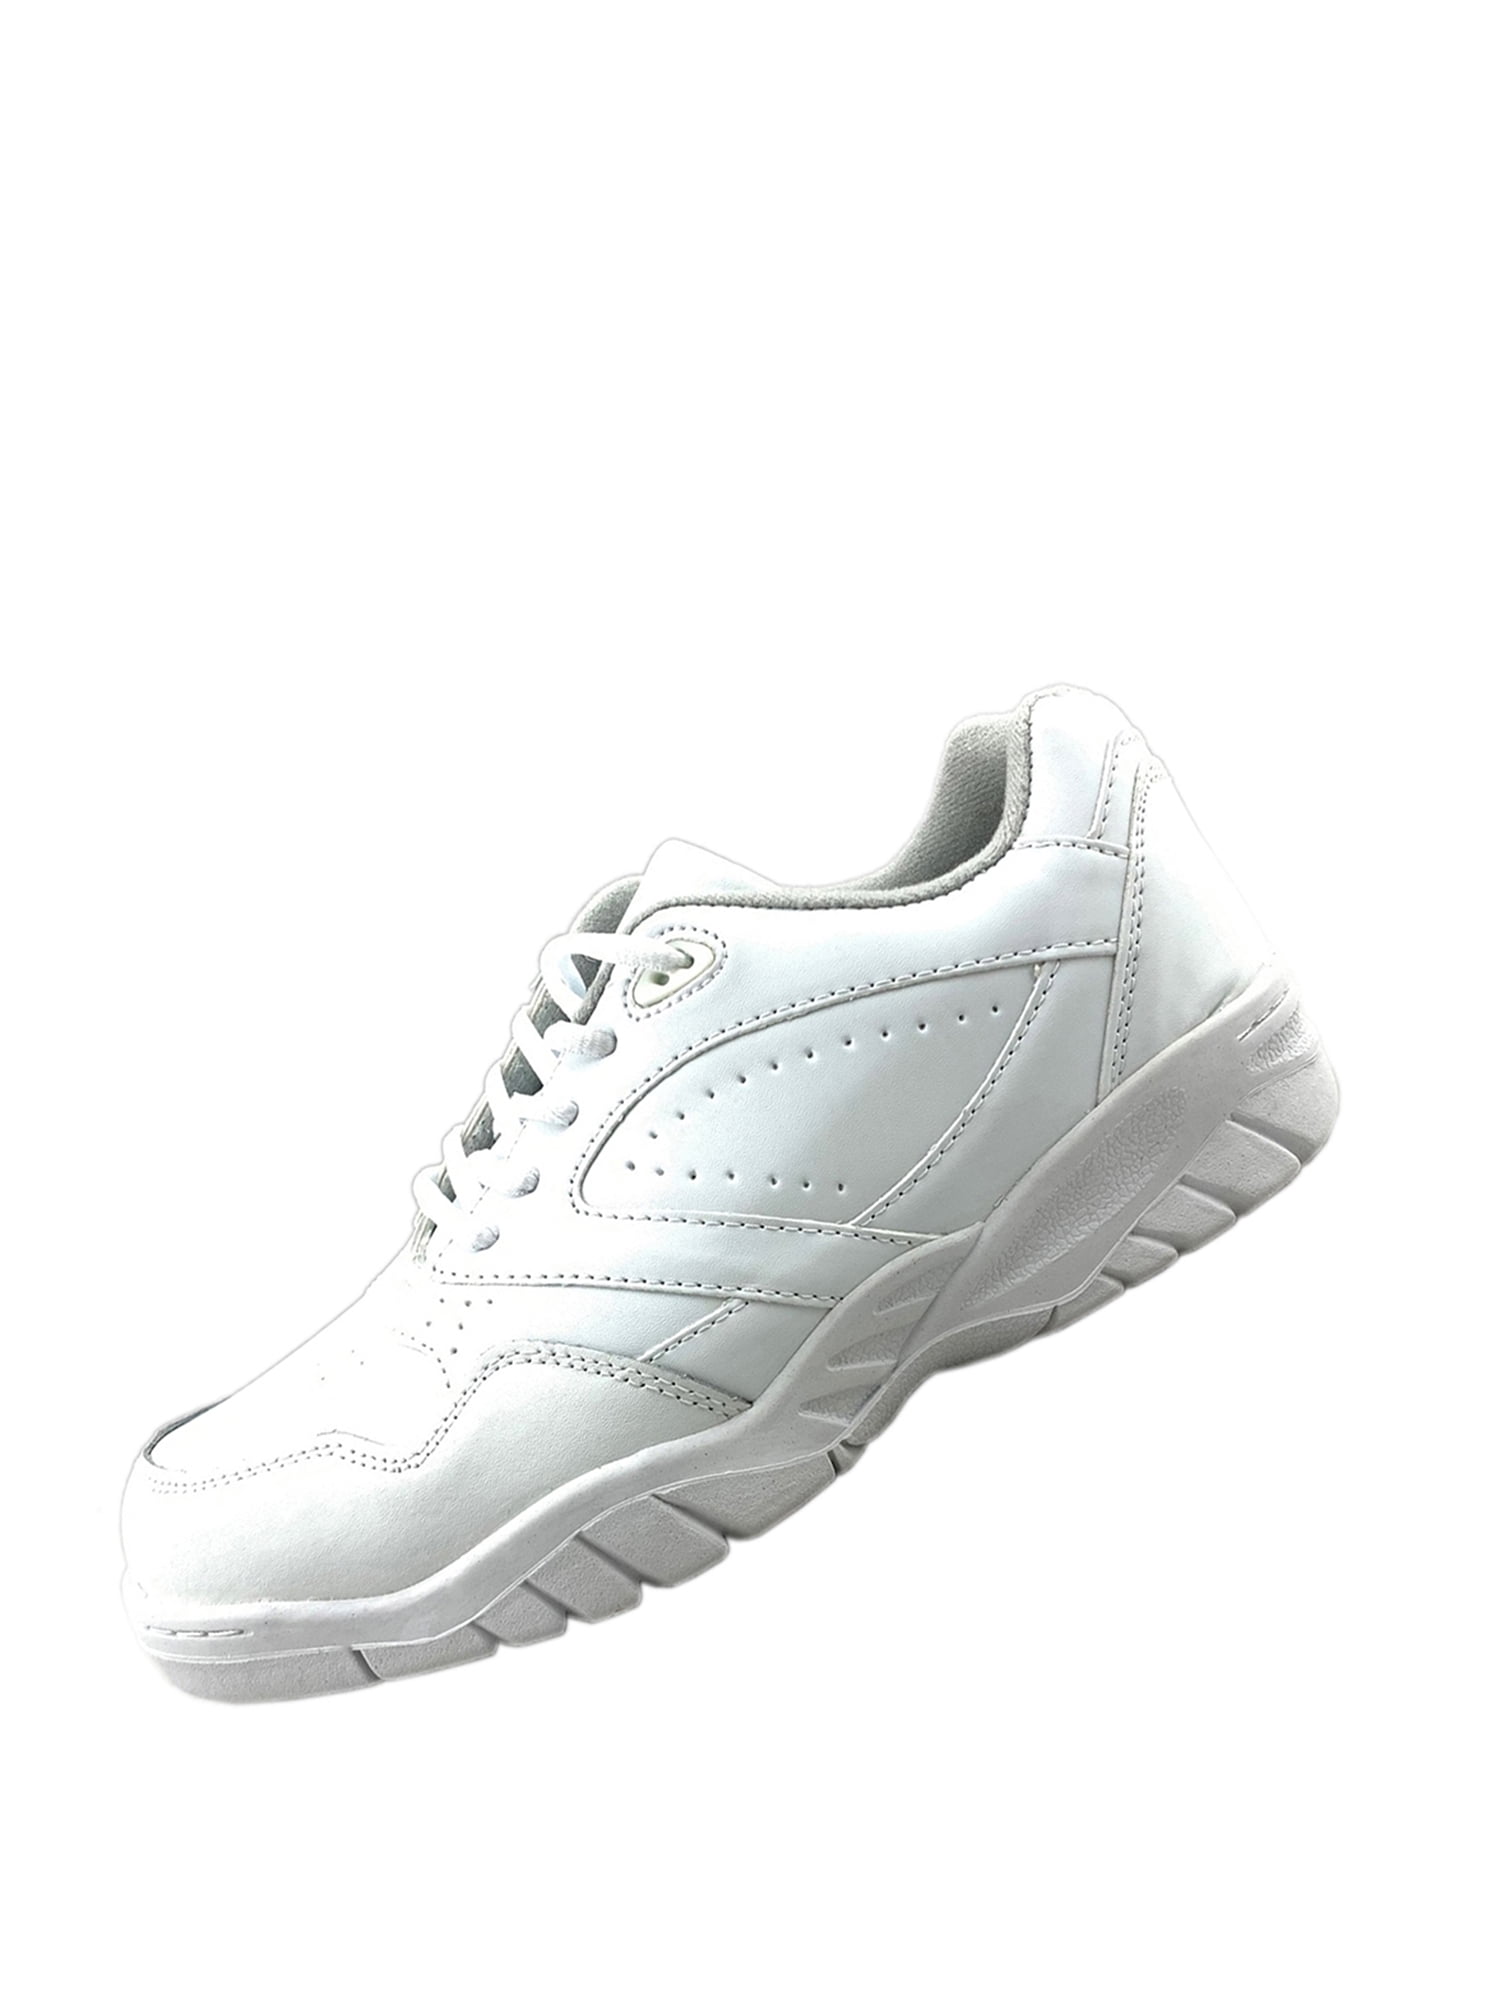 white leather shoes walmart